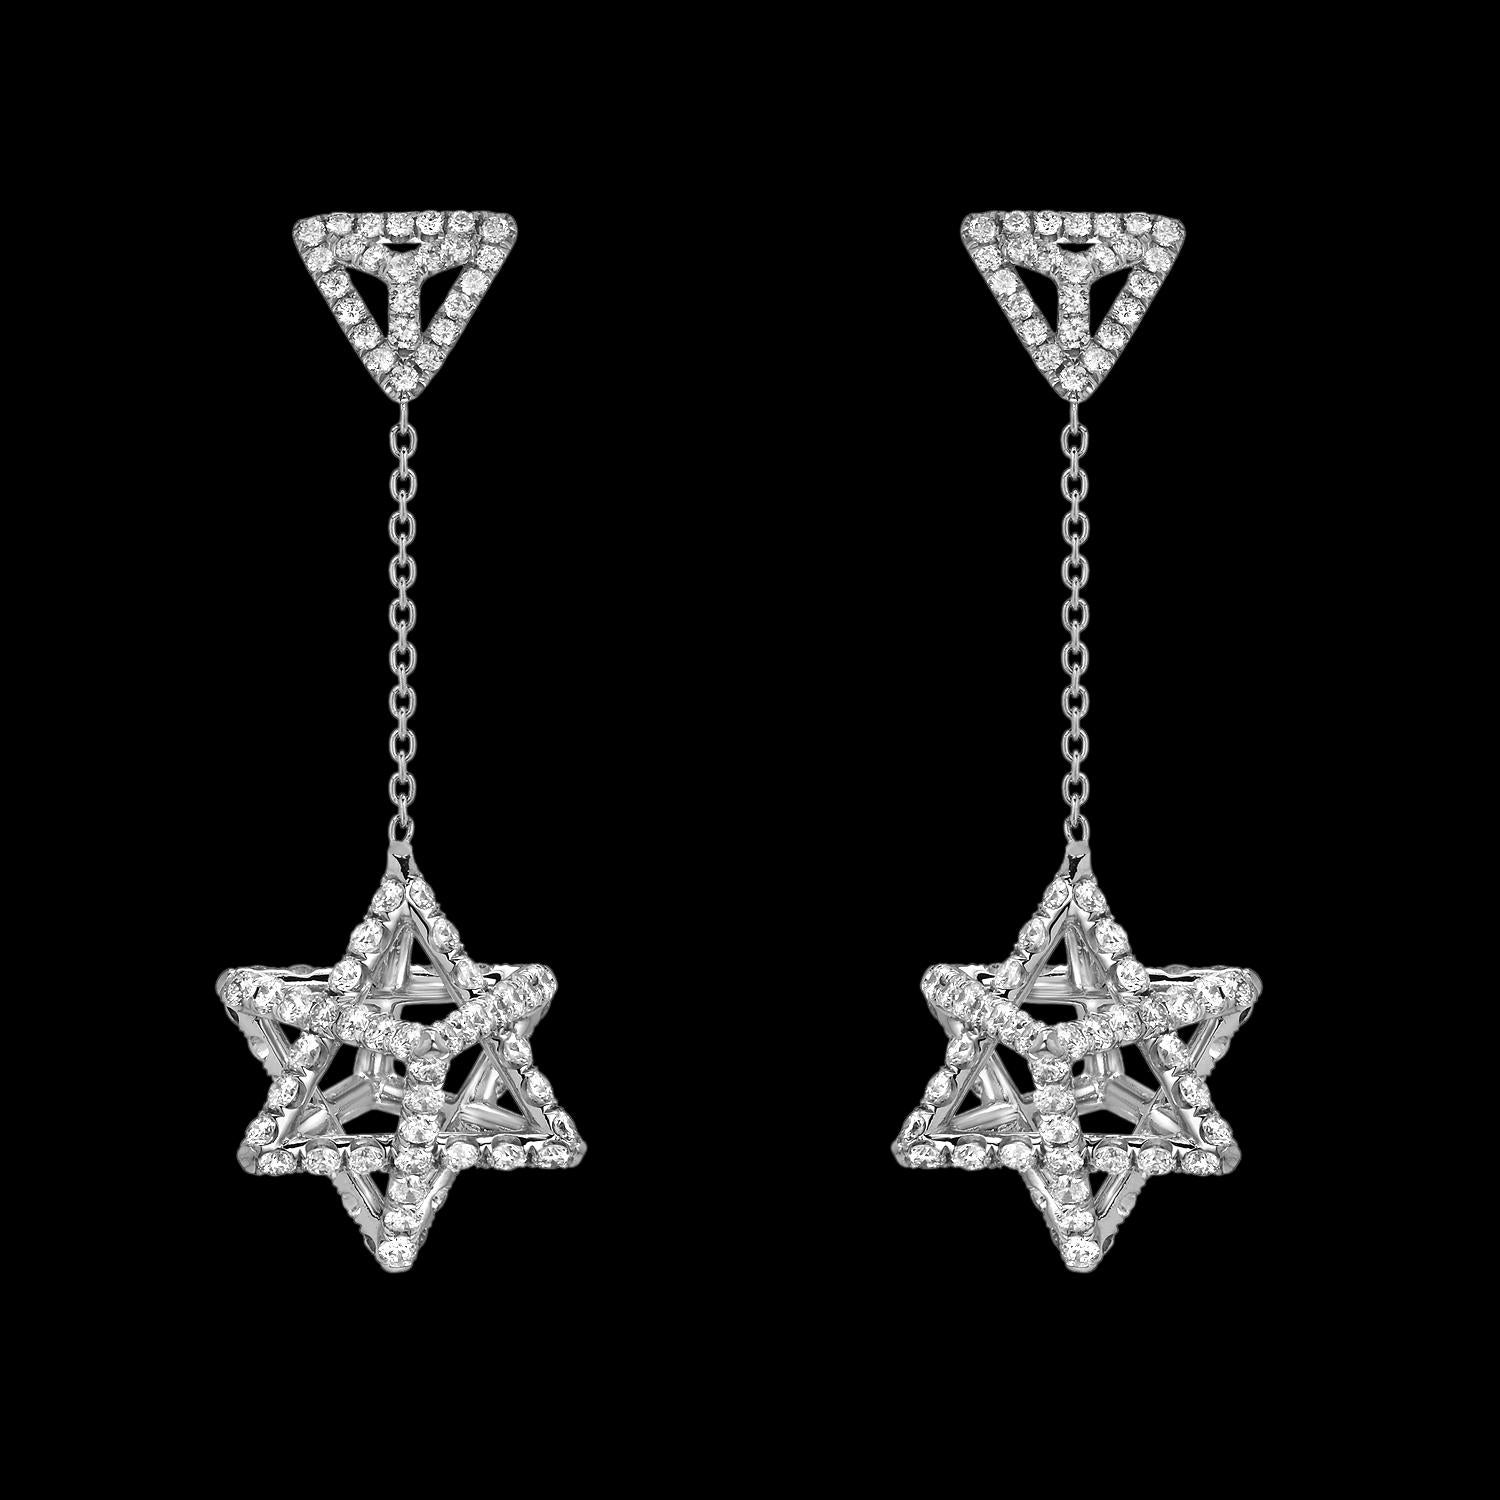 Heirloom quality 2.22 carat diamond platinum earrings, tethered by a three dimensional triangle stud, feature a single chain suspending a Merkaba star tetrahedron measuring 0.57”.  
Crafted by extremely skilled hands in the USA, Merkaba is a shining